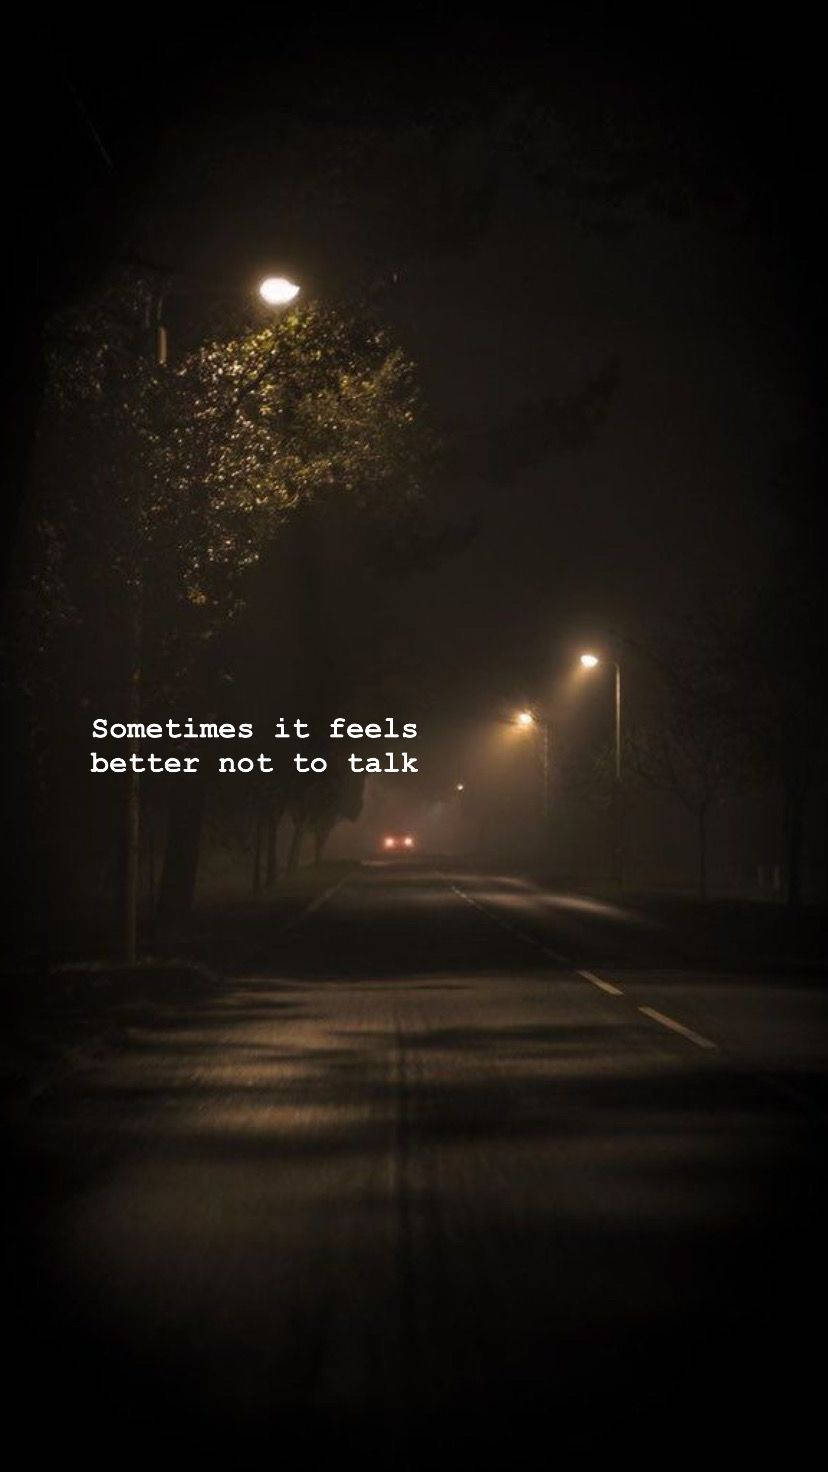 Dark Road View With Quote Wallpaper